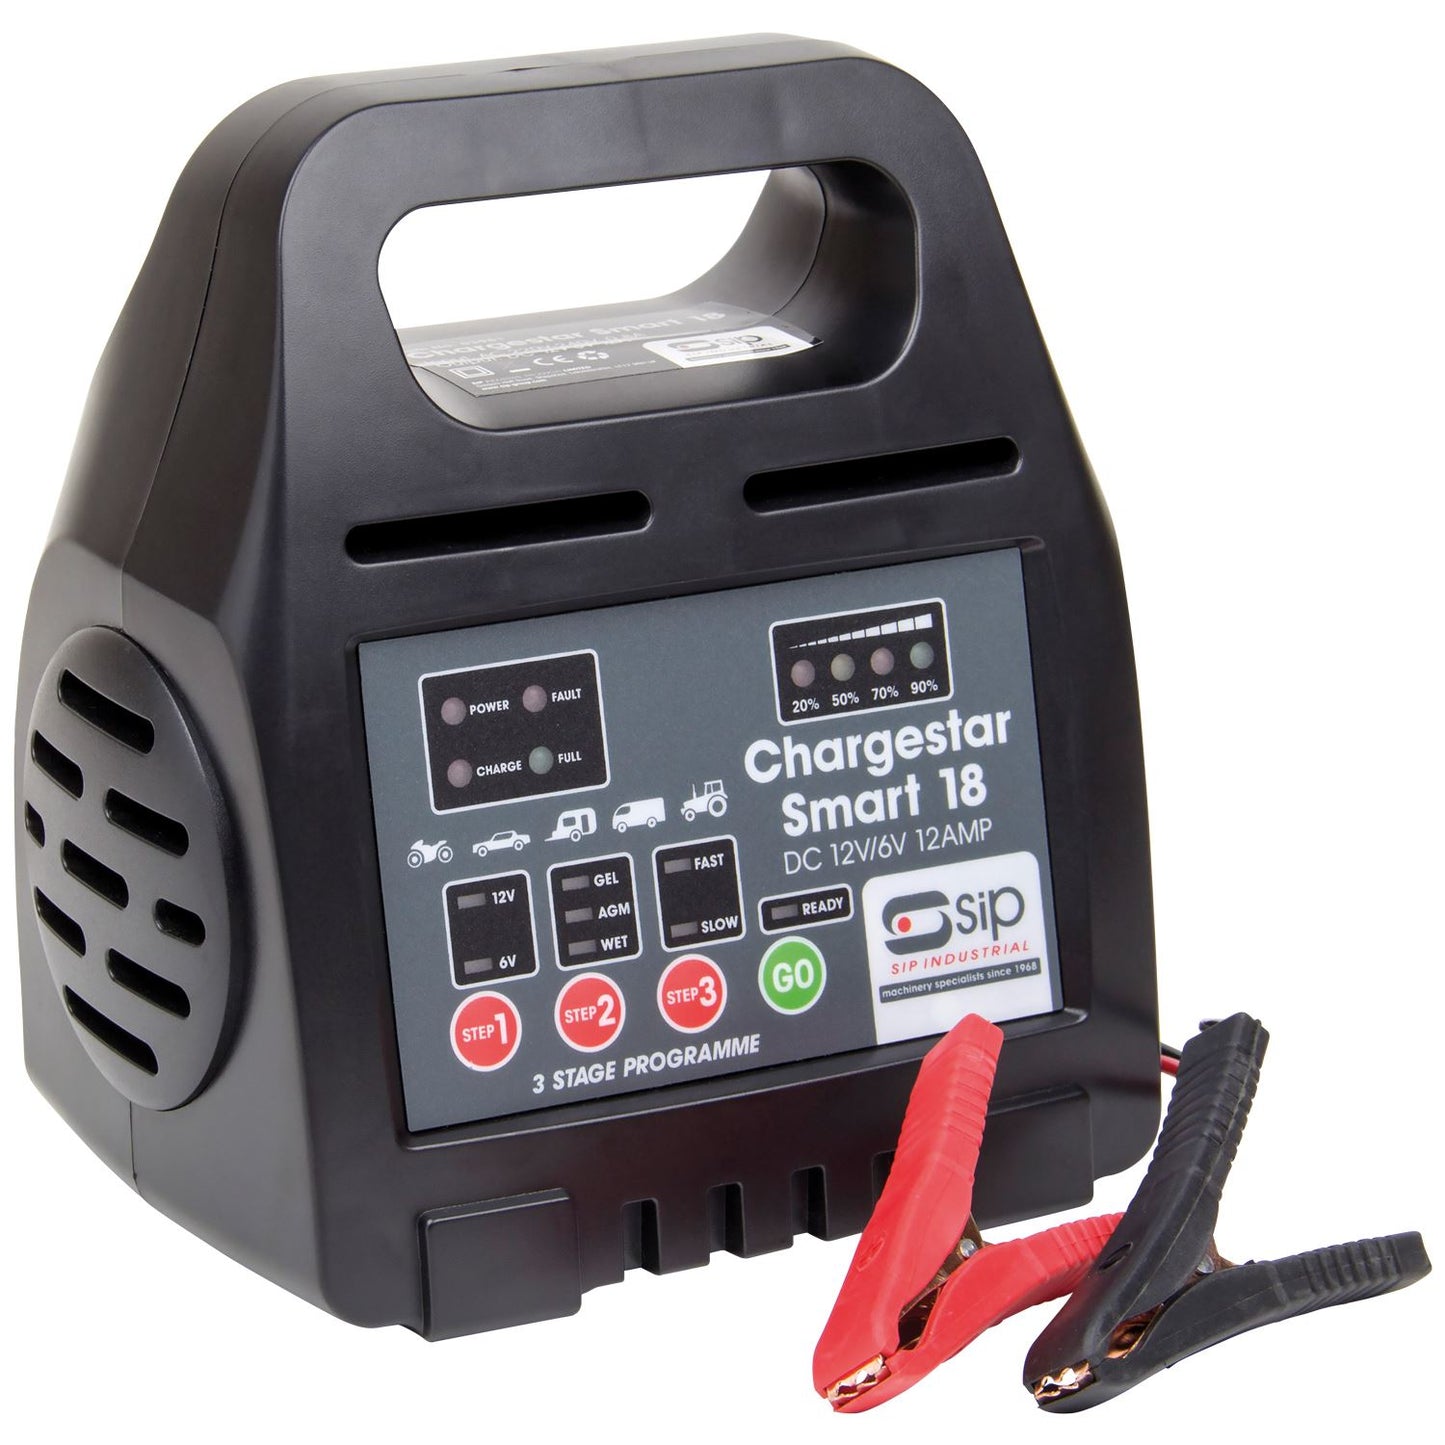 SIP Industrial CHARGESTAR Smart 18 Battery Charger